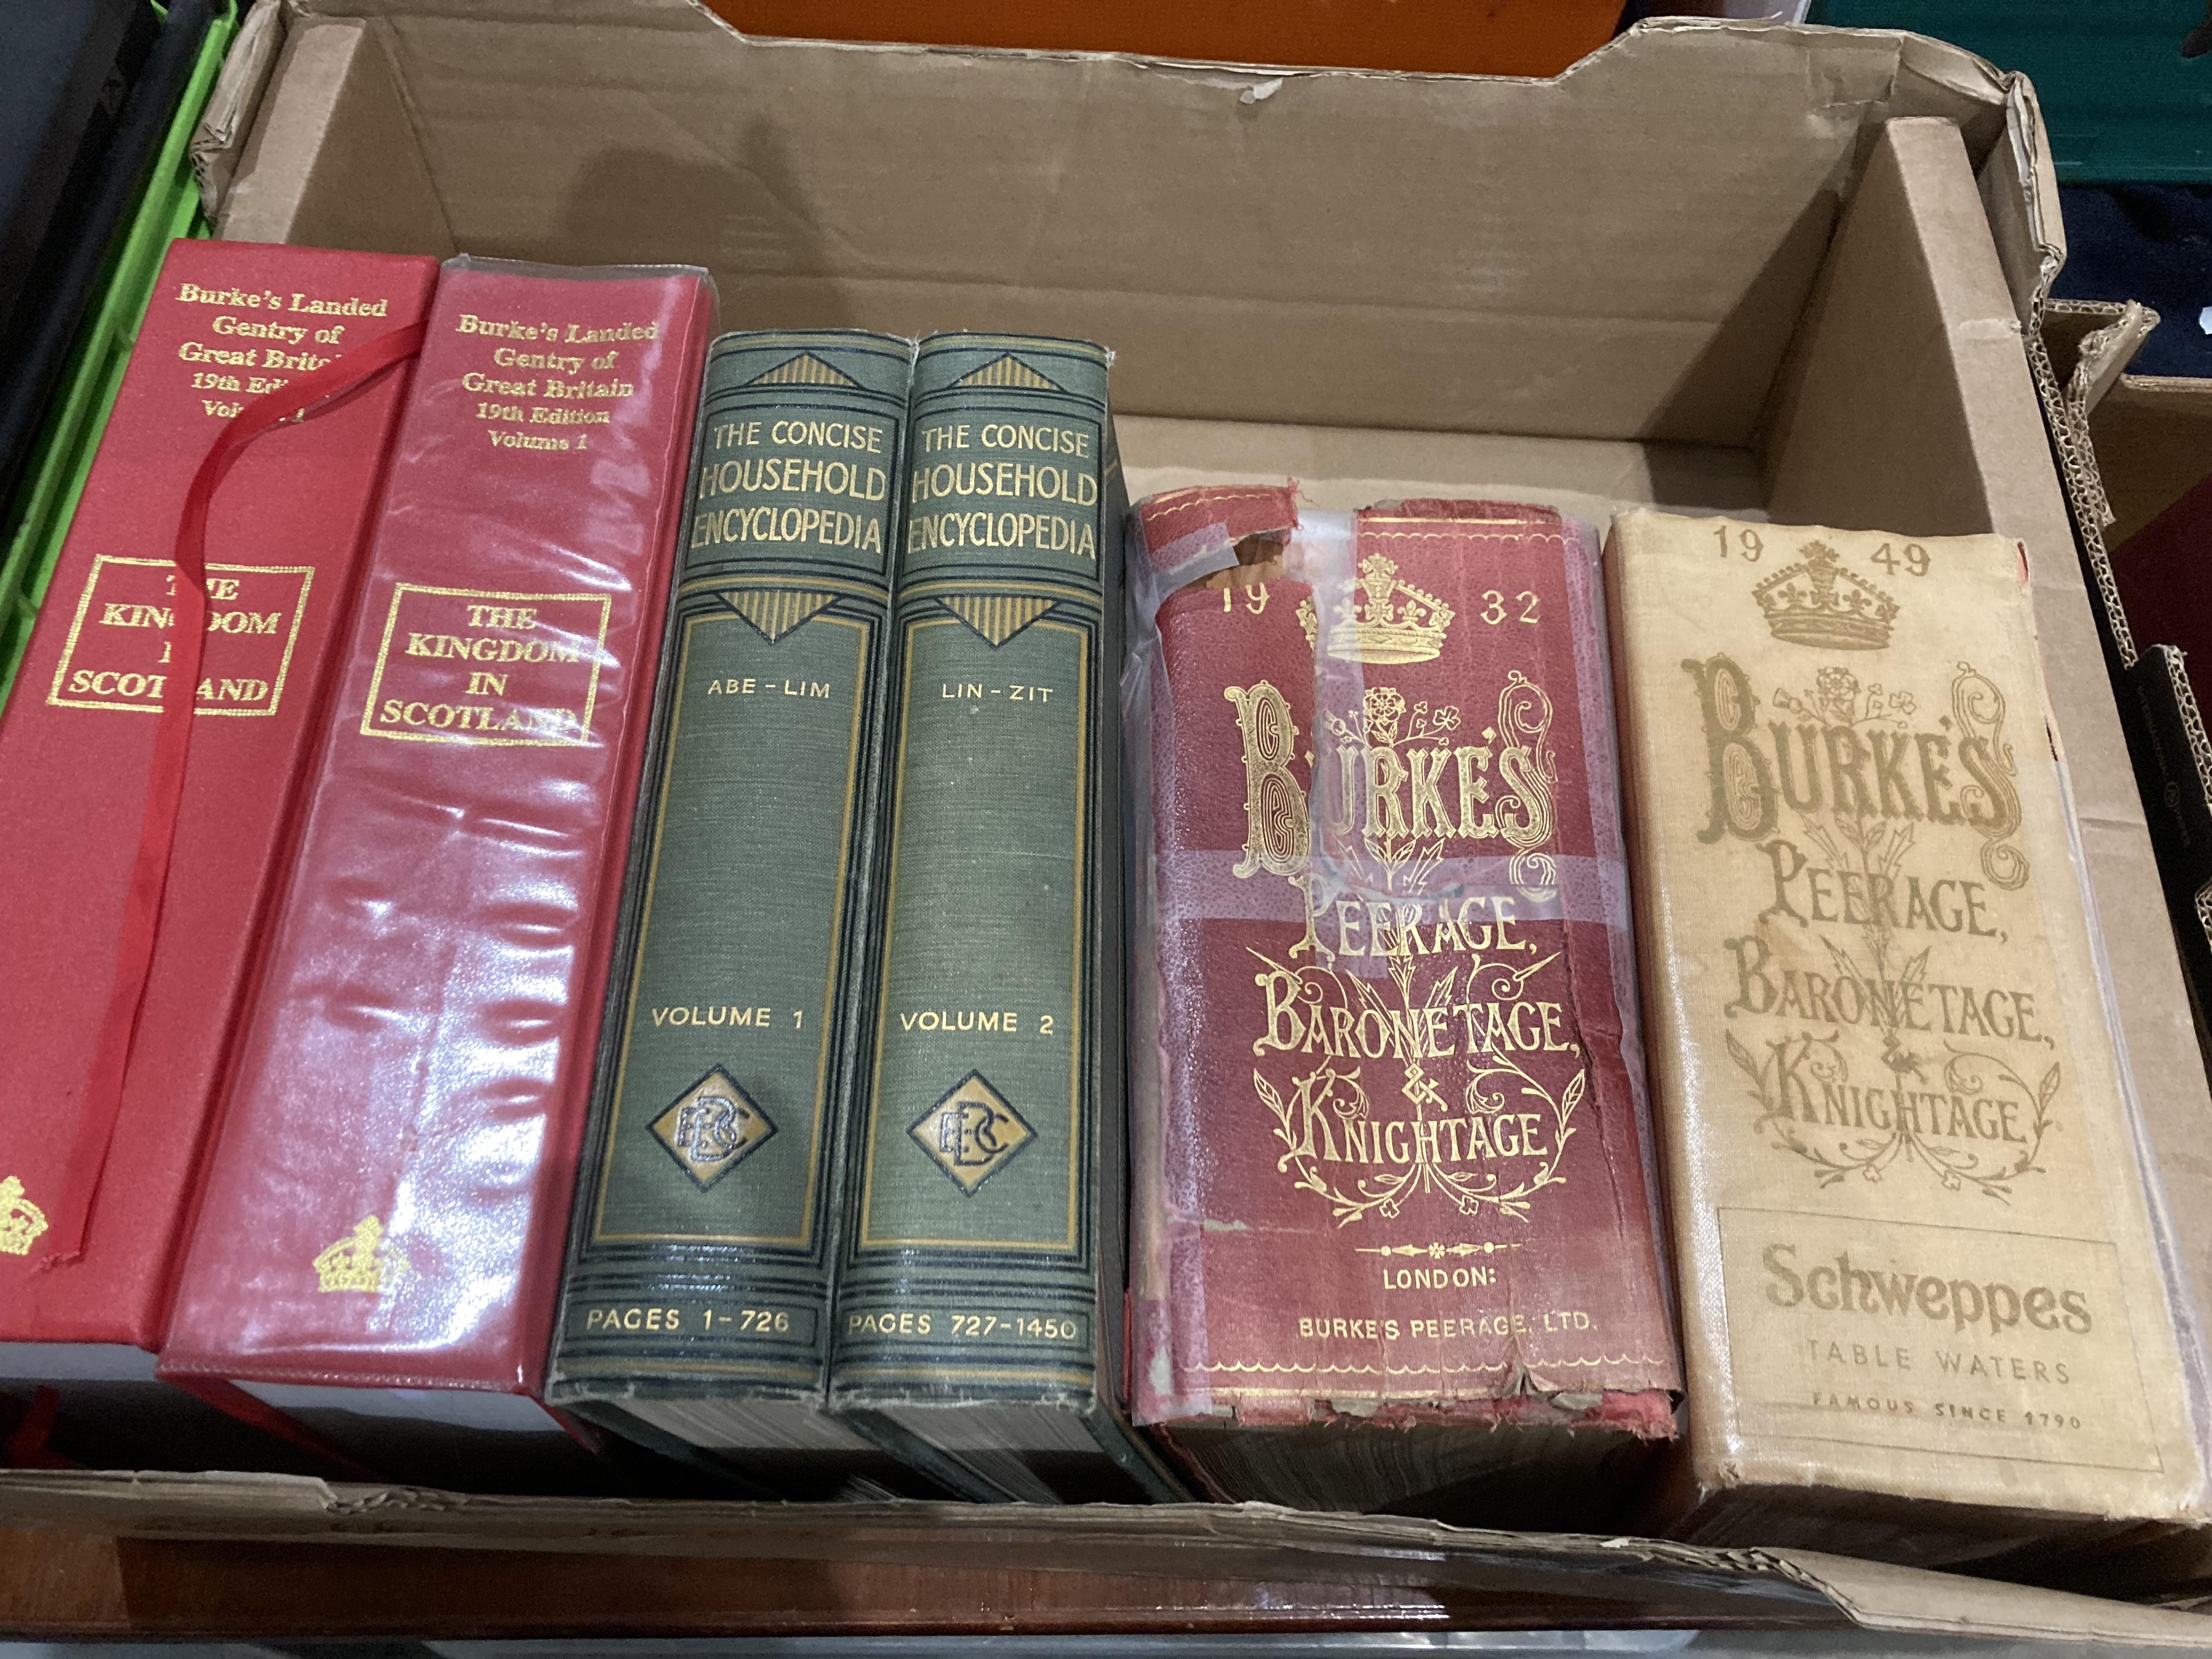 Contents to two cardboard boxes four volumes of Burkes Reerage, Baronetage and Knightage (1902, - Image 3 of 3